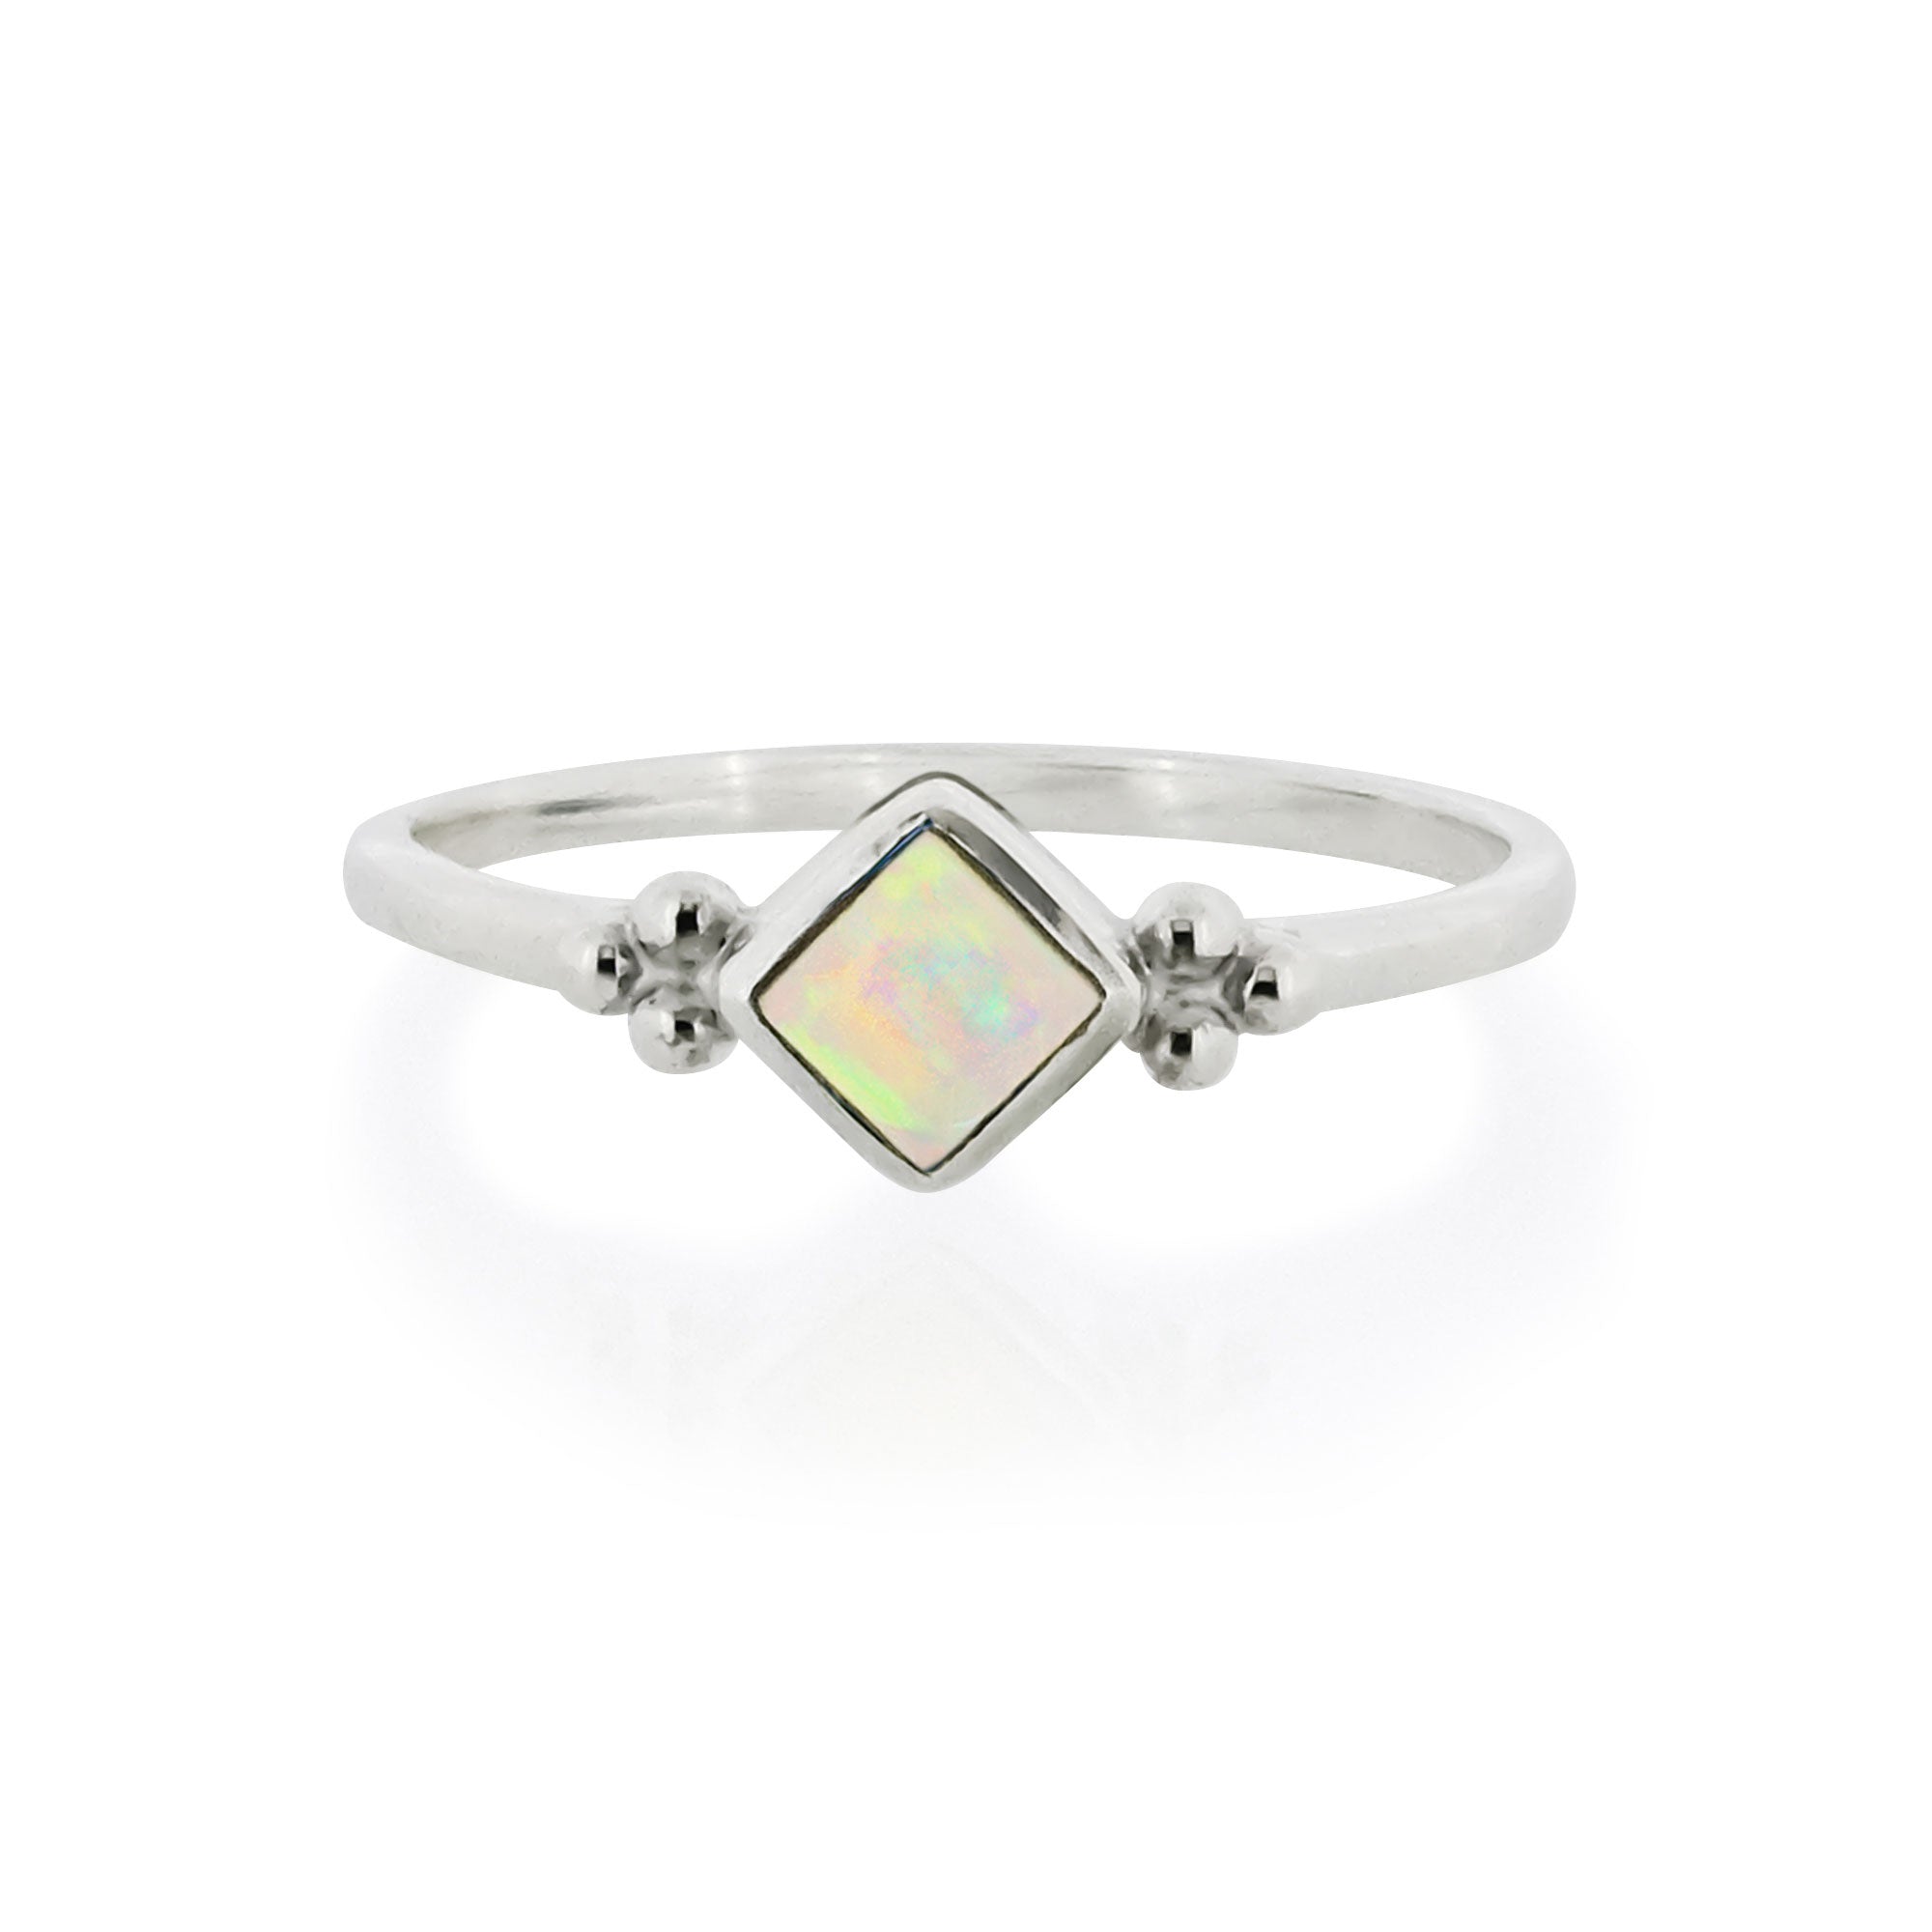 Silver Opal ring, October birthstone stacking ring